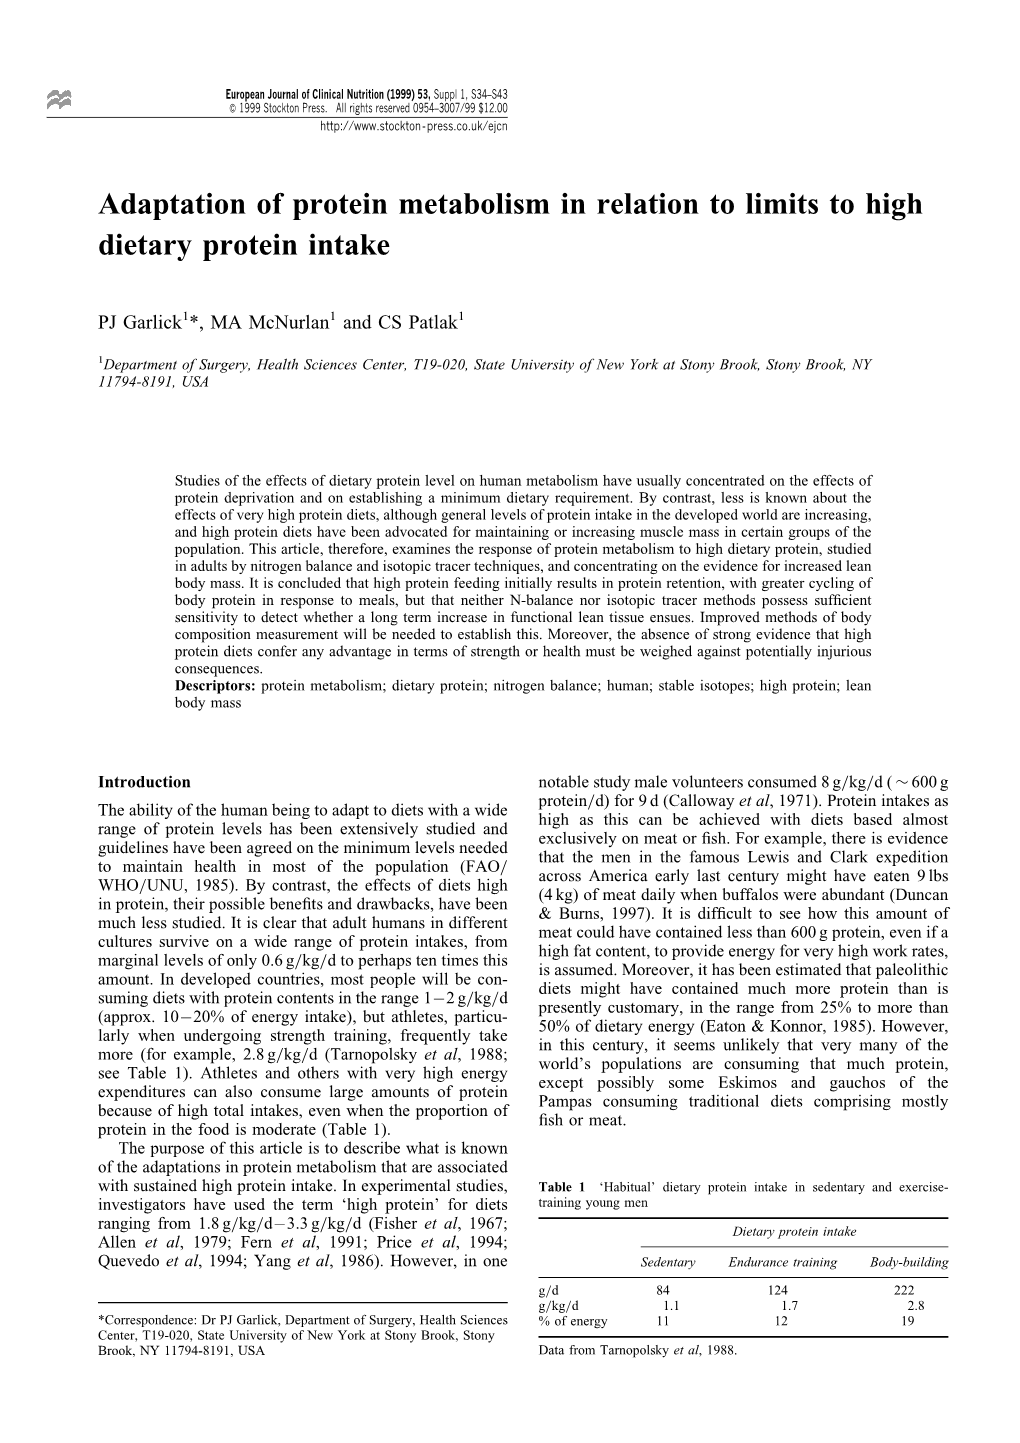 Adaptation of Protein Metabolism in Relation to Limits to High Dietary Protein Intake